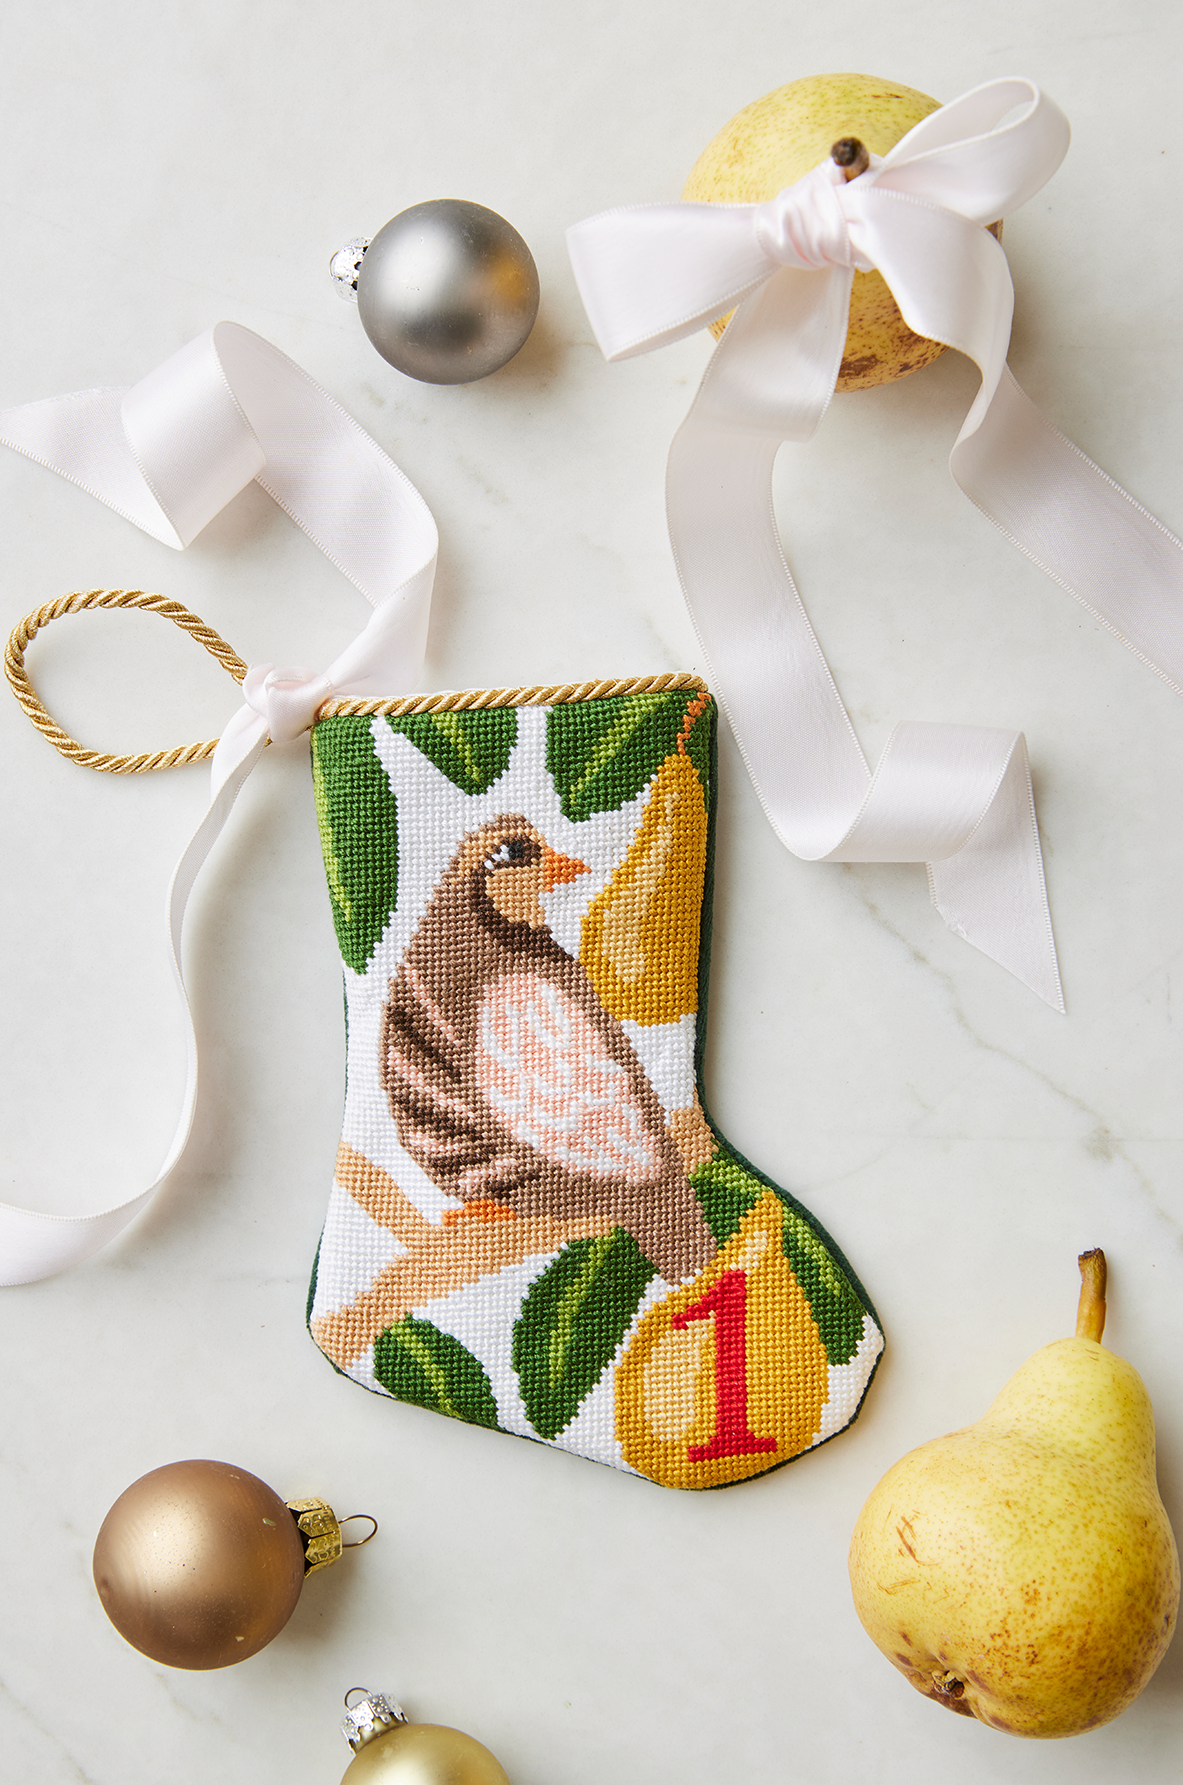 Mini Needlepoint Stocking - A Partridge in a Pear Tree